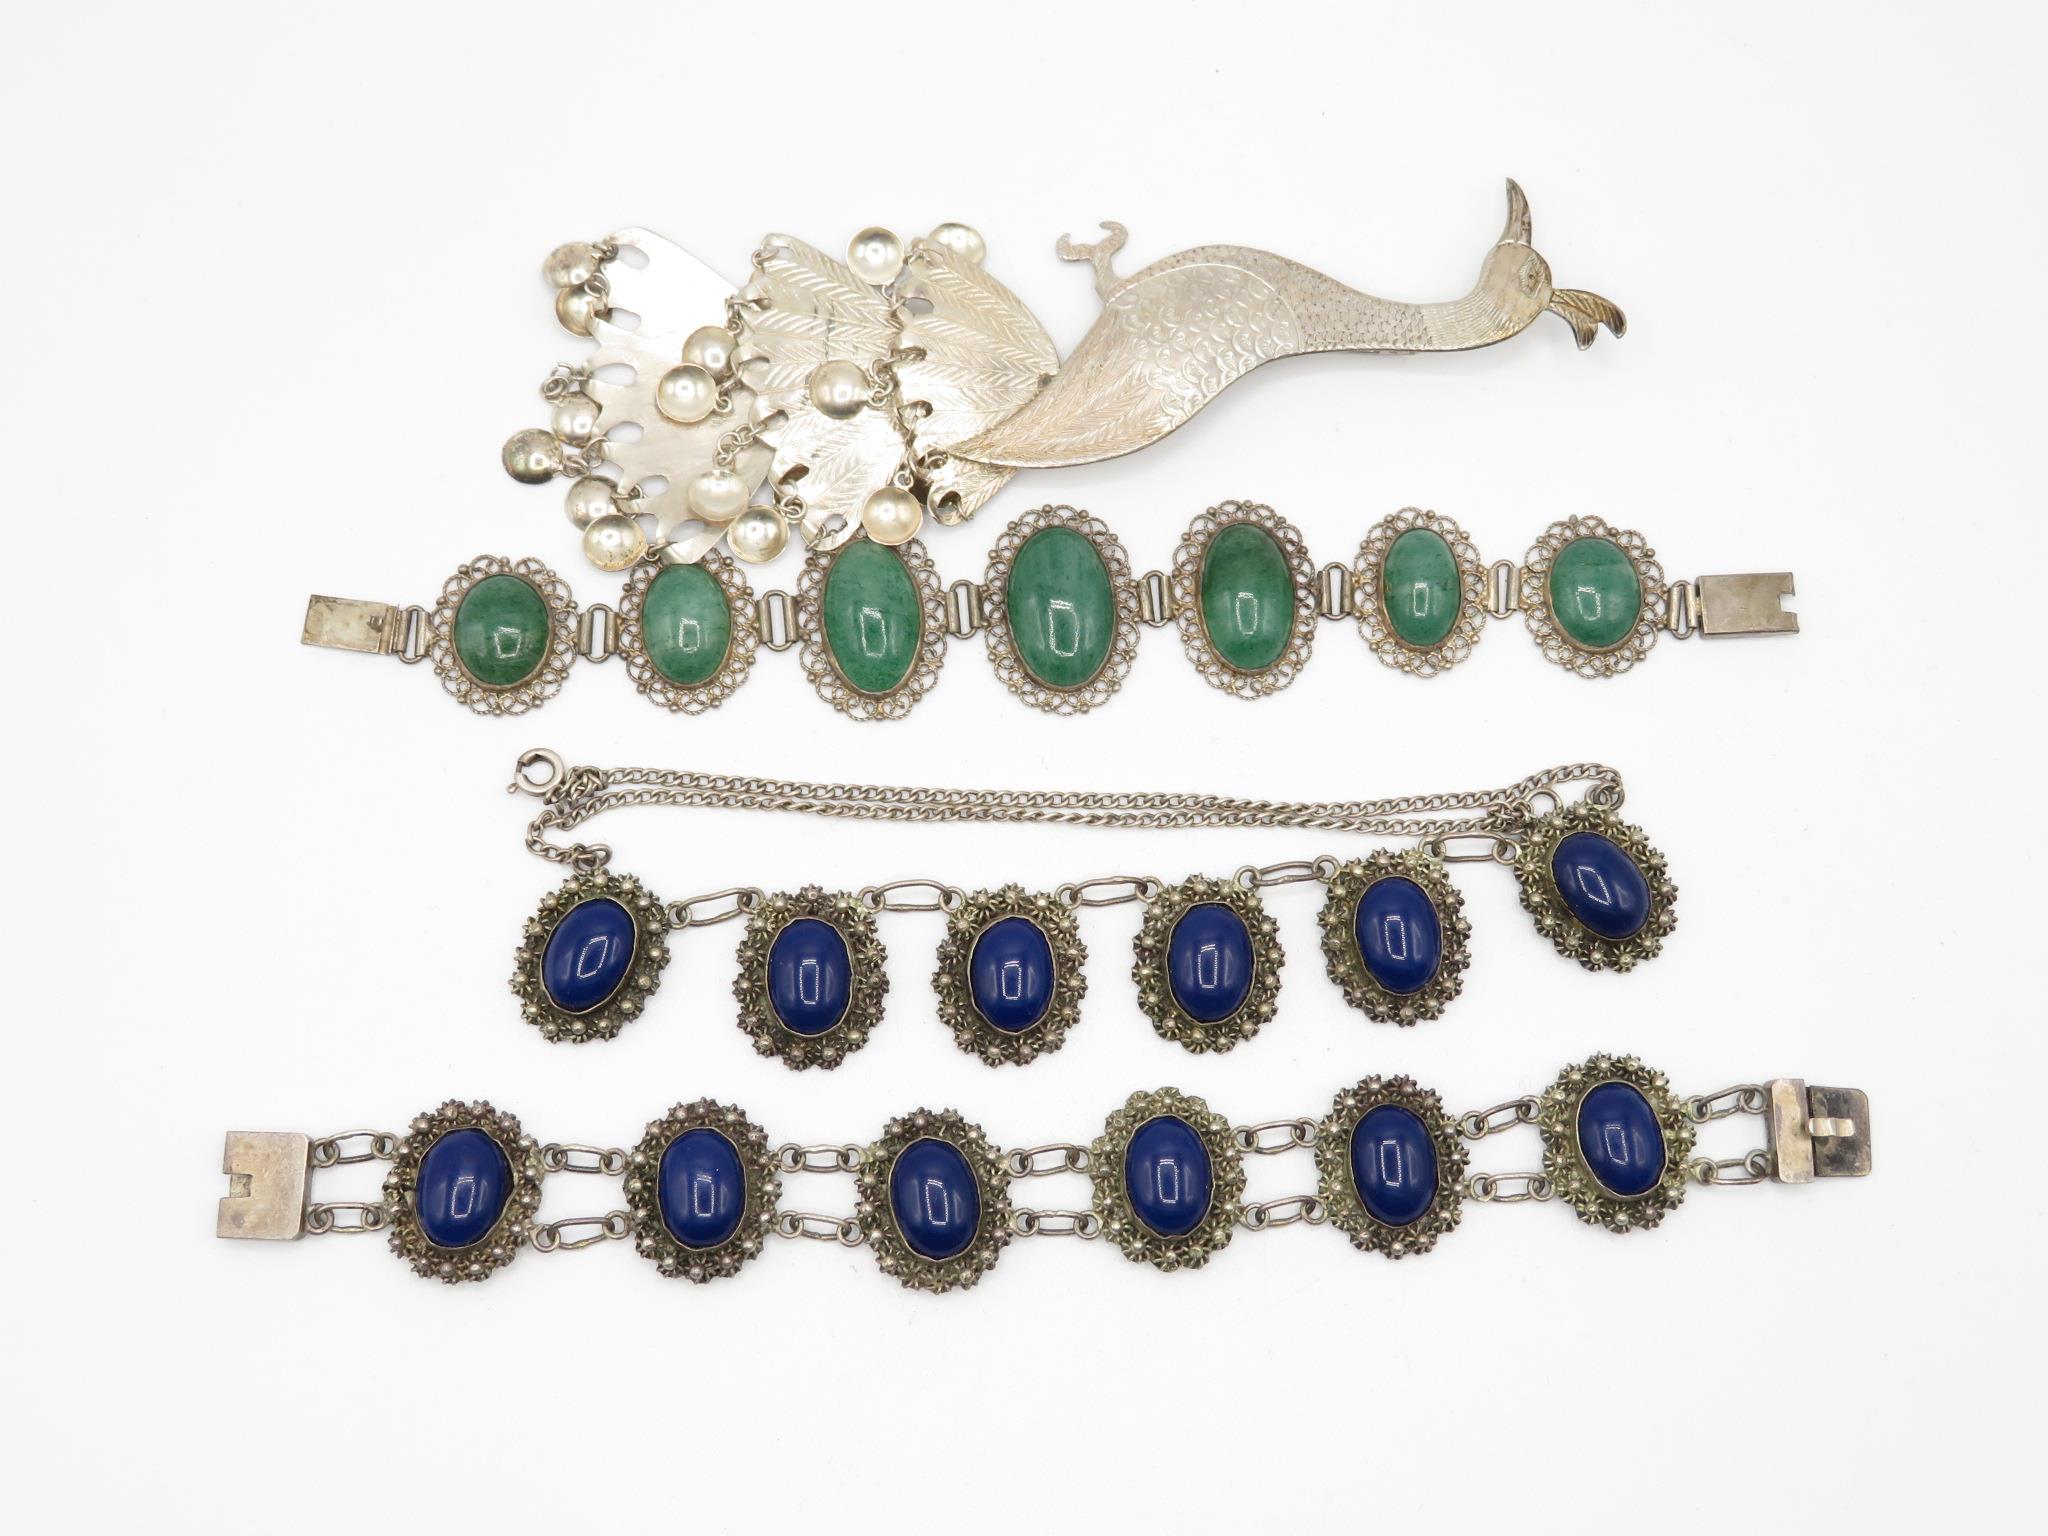 A Silver Filigree Gemstone Set Necklace And Bracelet, And A Silver Peacock Brooch (89g) - Image 2 of 3